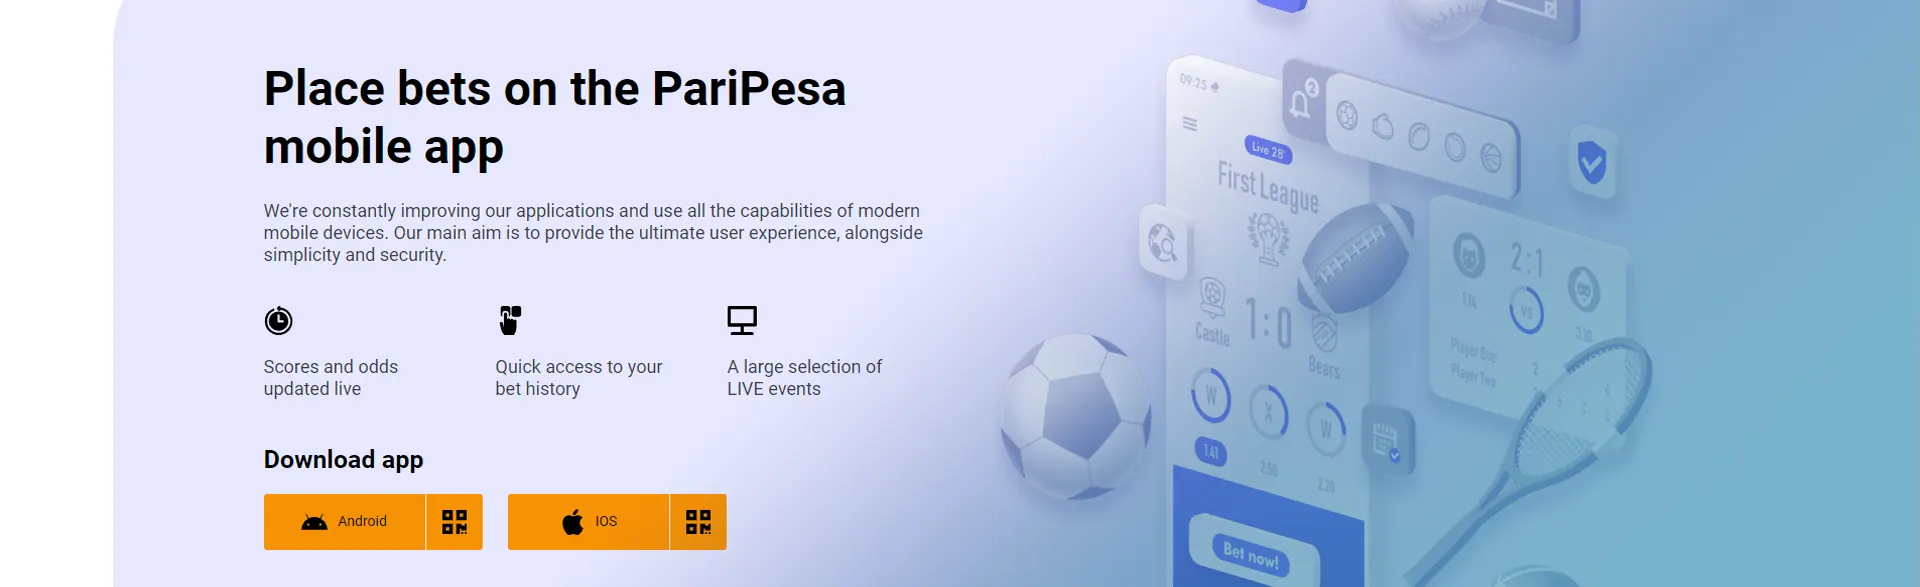 Field for downloading mobile app for Android or IOS on the Paripesa betting site.